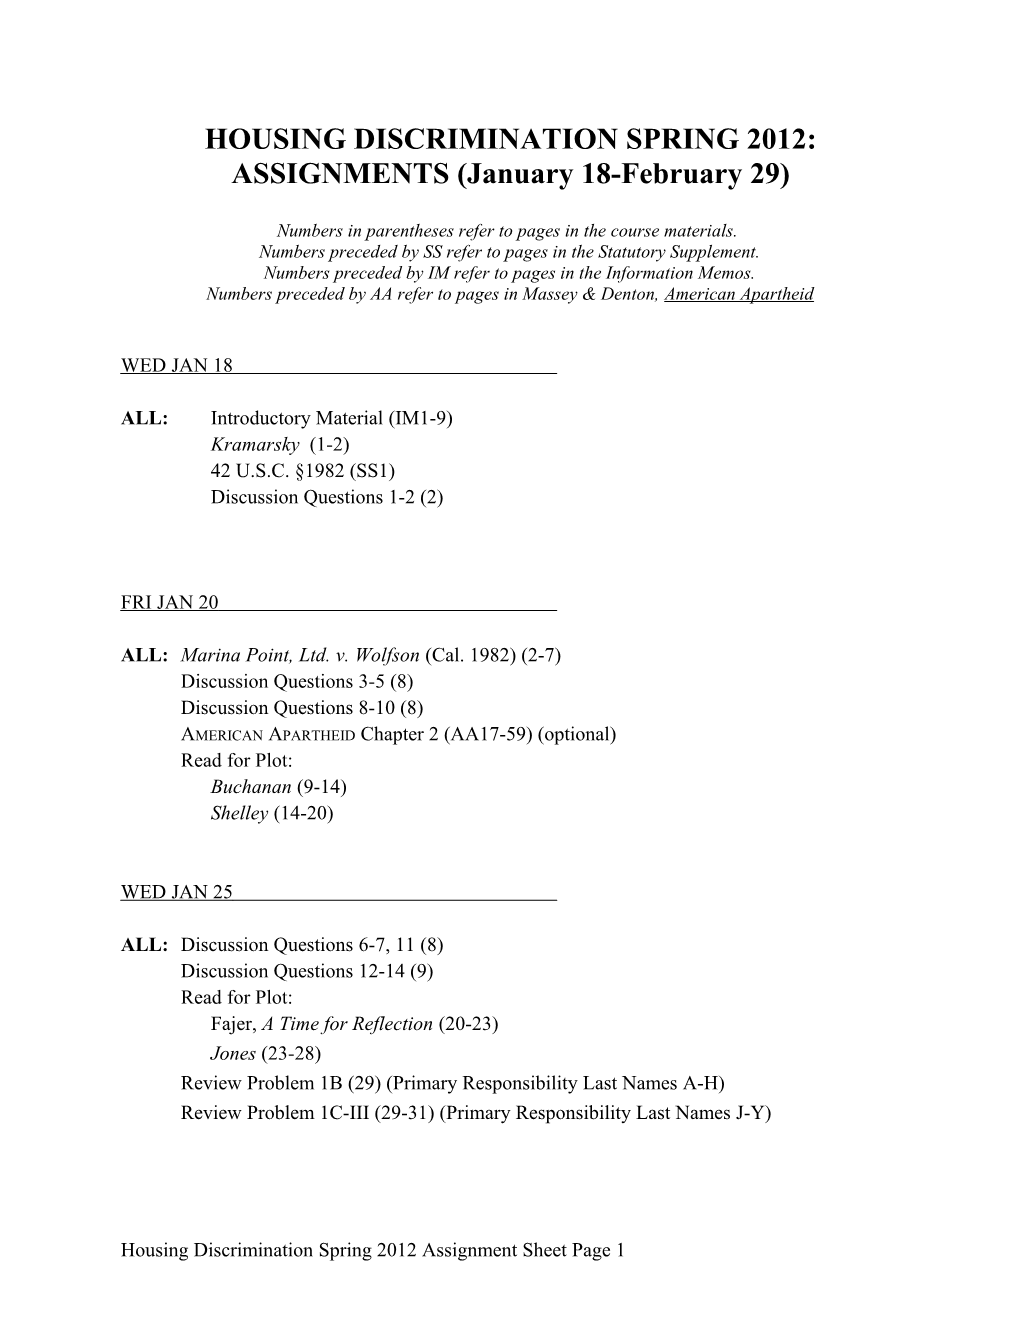 HOUSING DISCRIMINATION SPRING 2012: ASSIGNMENTS (January 18-February 29)